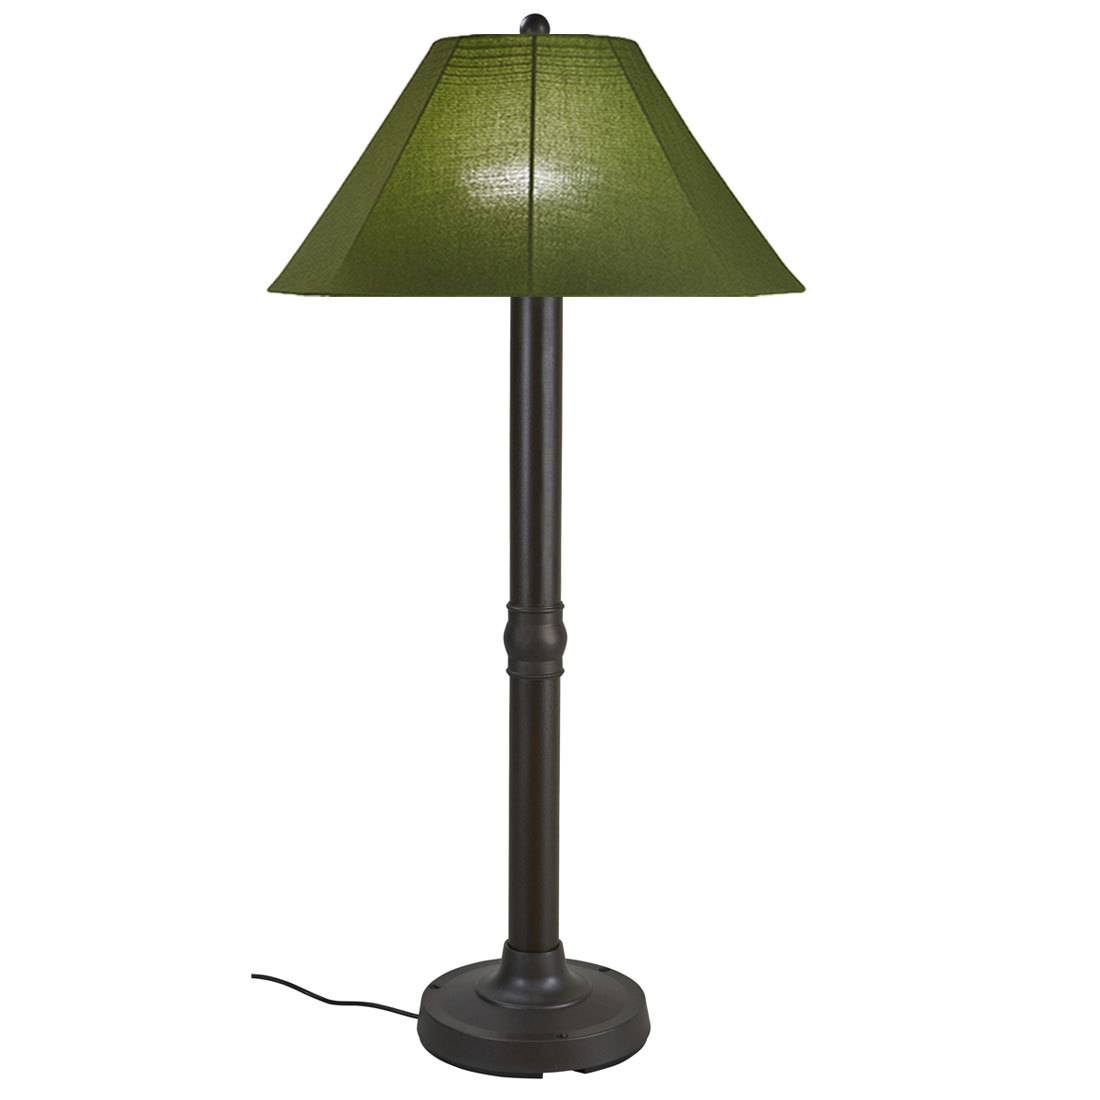 Catalina Ii Patio Floor Lamp intended for dimensions 1100 X 1100